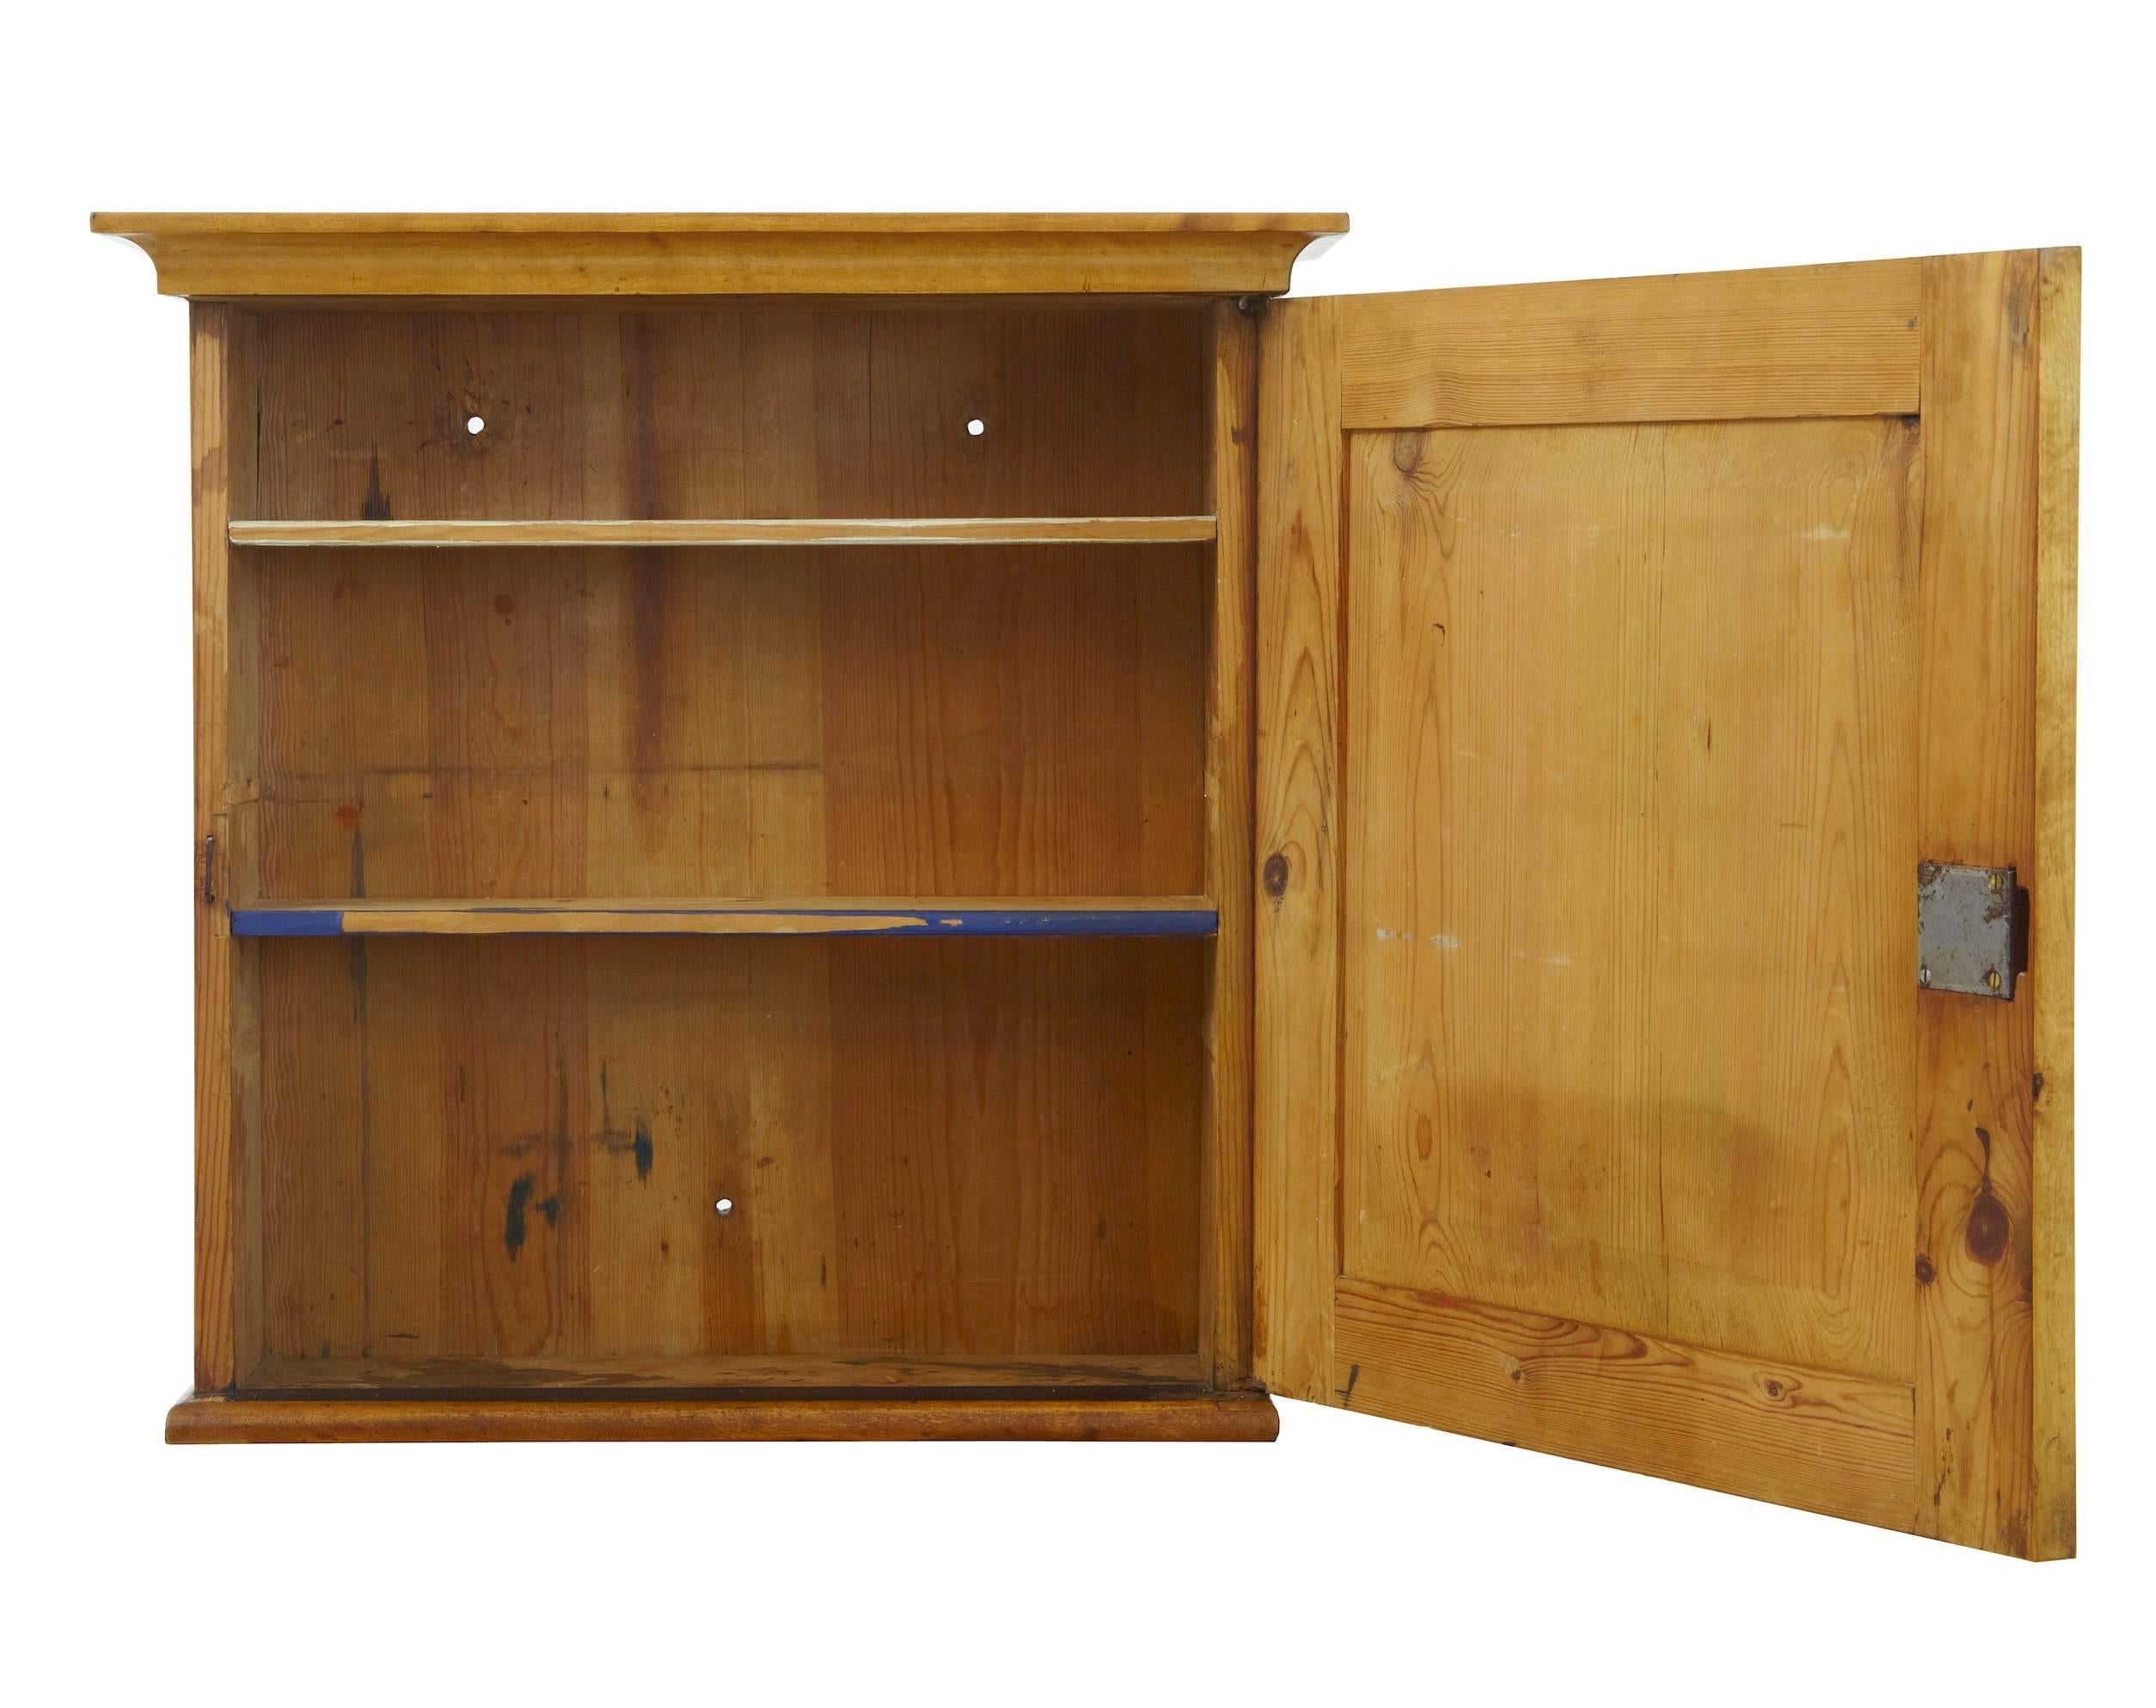 Swedish birch cabinet, circa 1890.
Single door birch hanging wall cabinet, ideal for a bathroom or cloakroom.
Containing two shelves, which have been partially painted.

Measures: Height 21 1/2